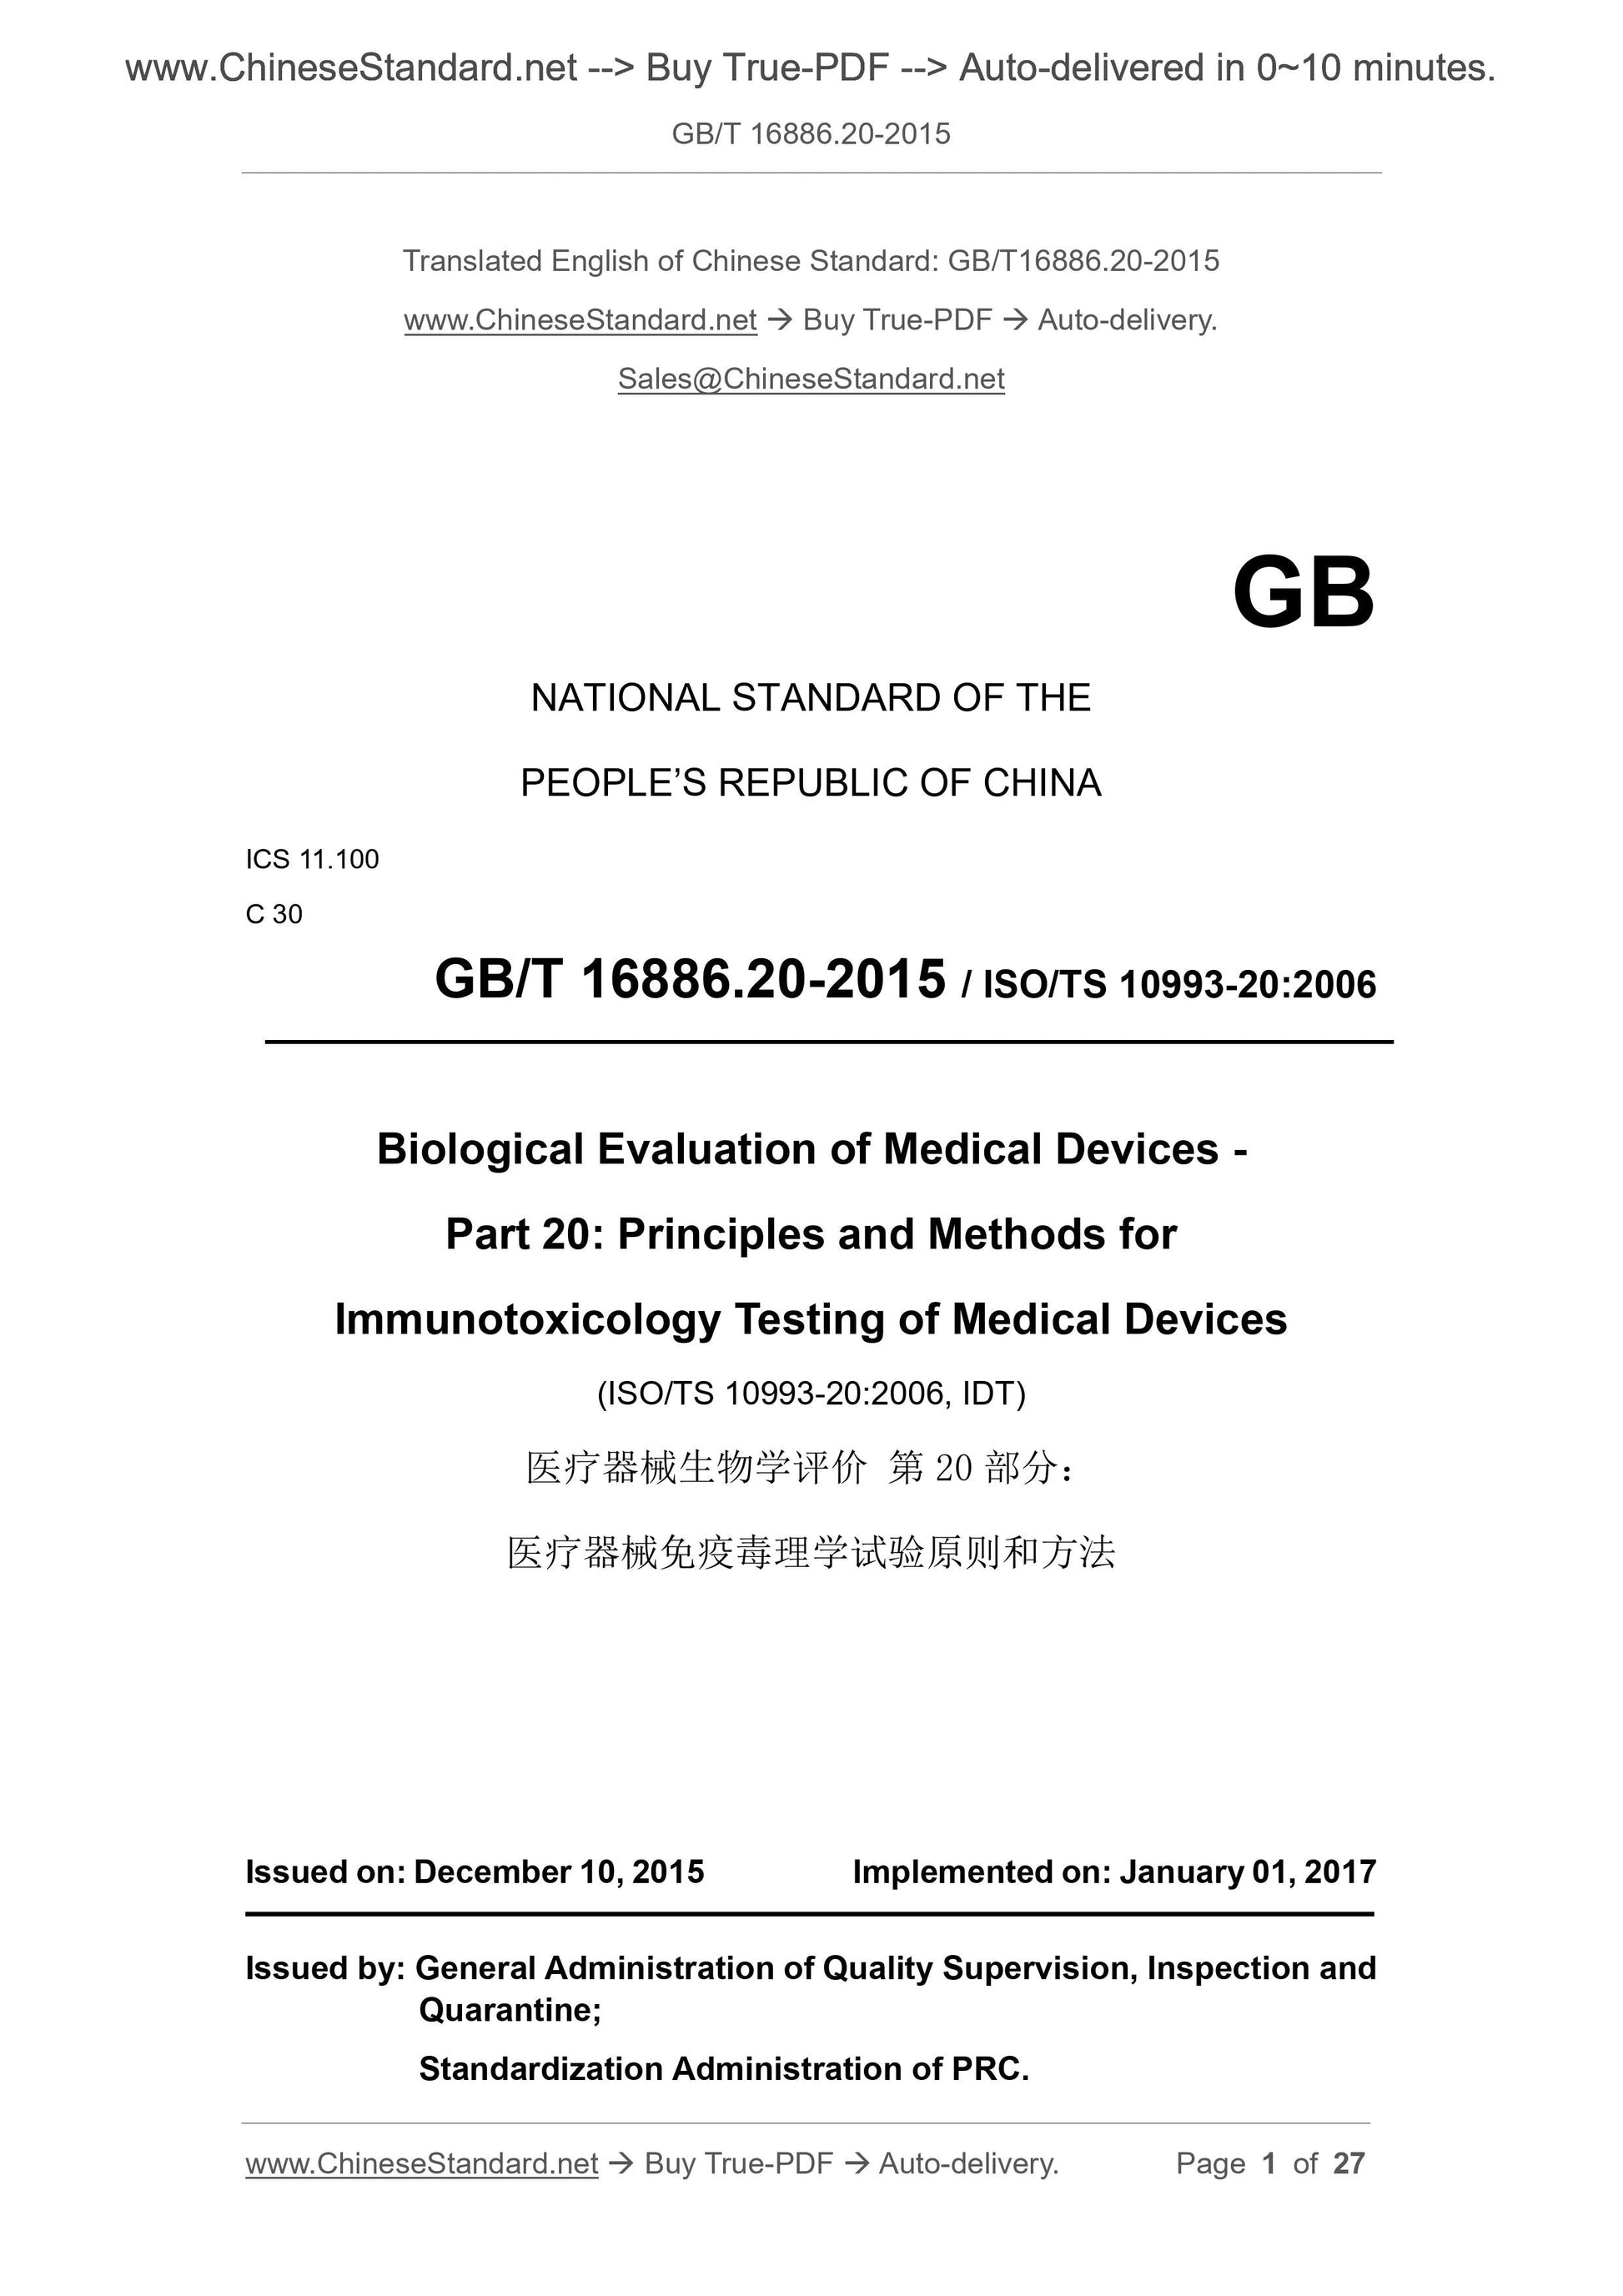 GB/T 16886.20-2015 Page 1